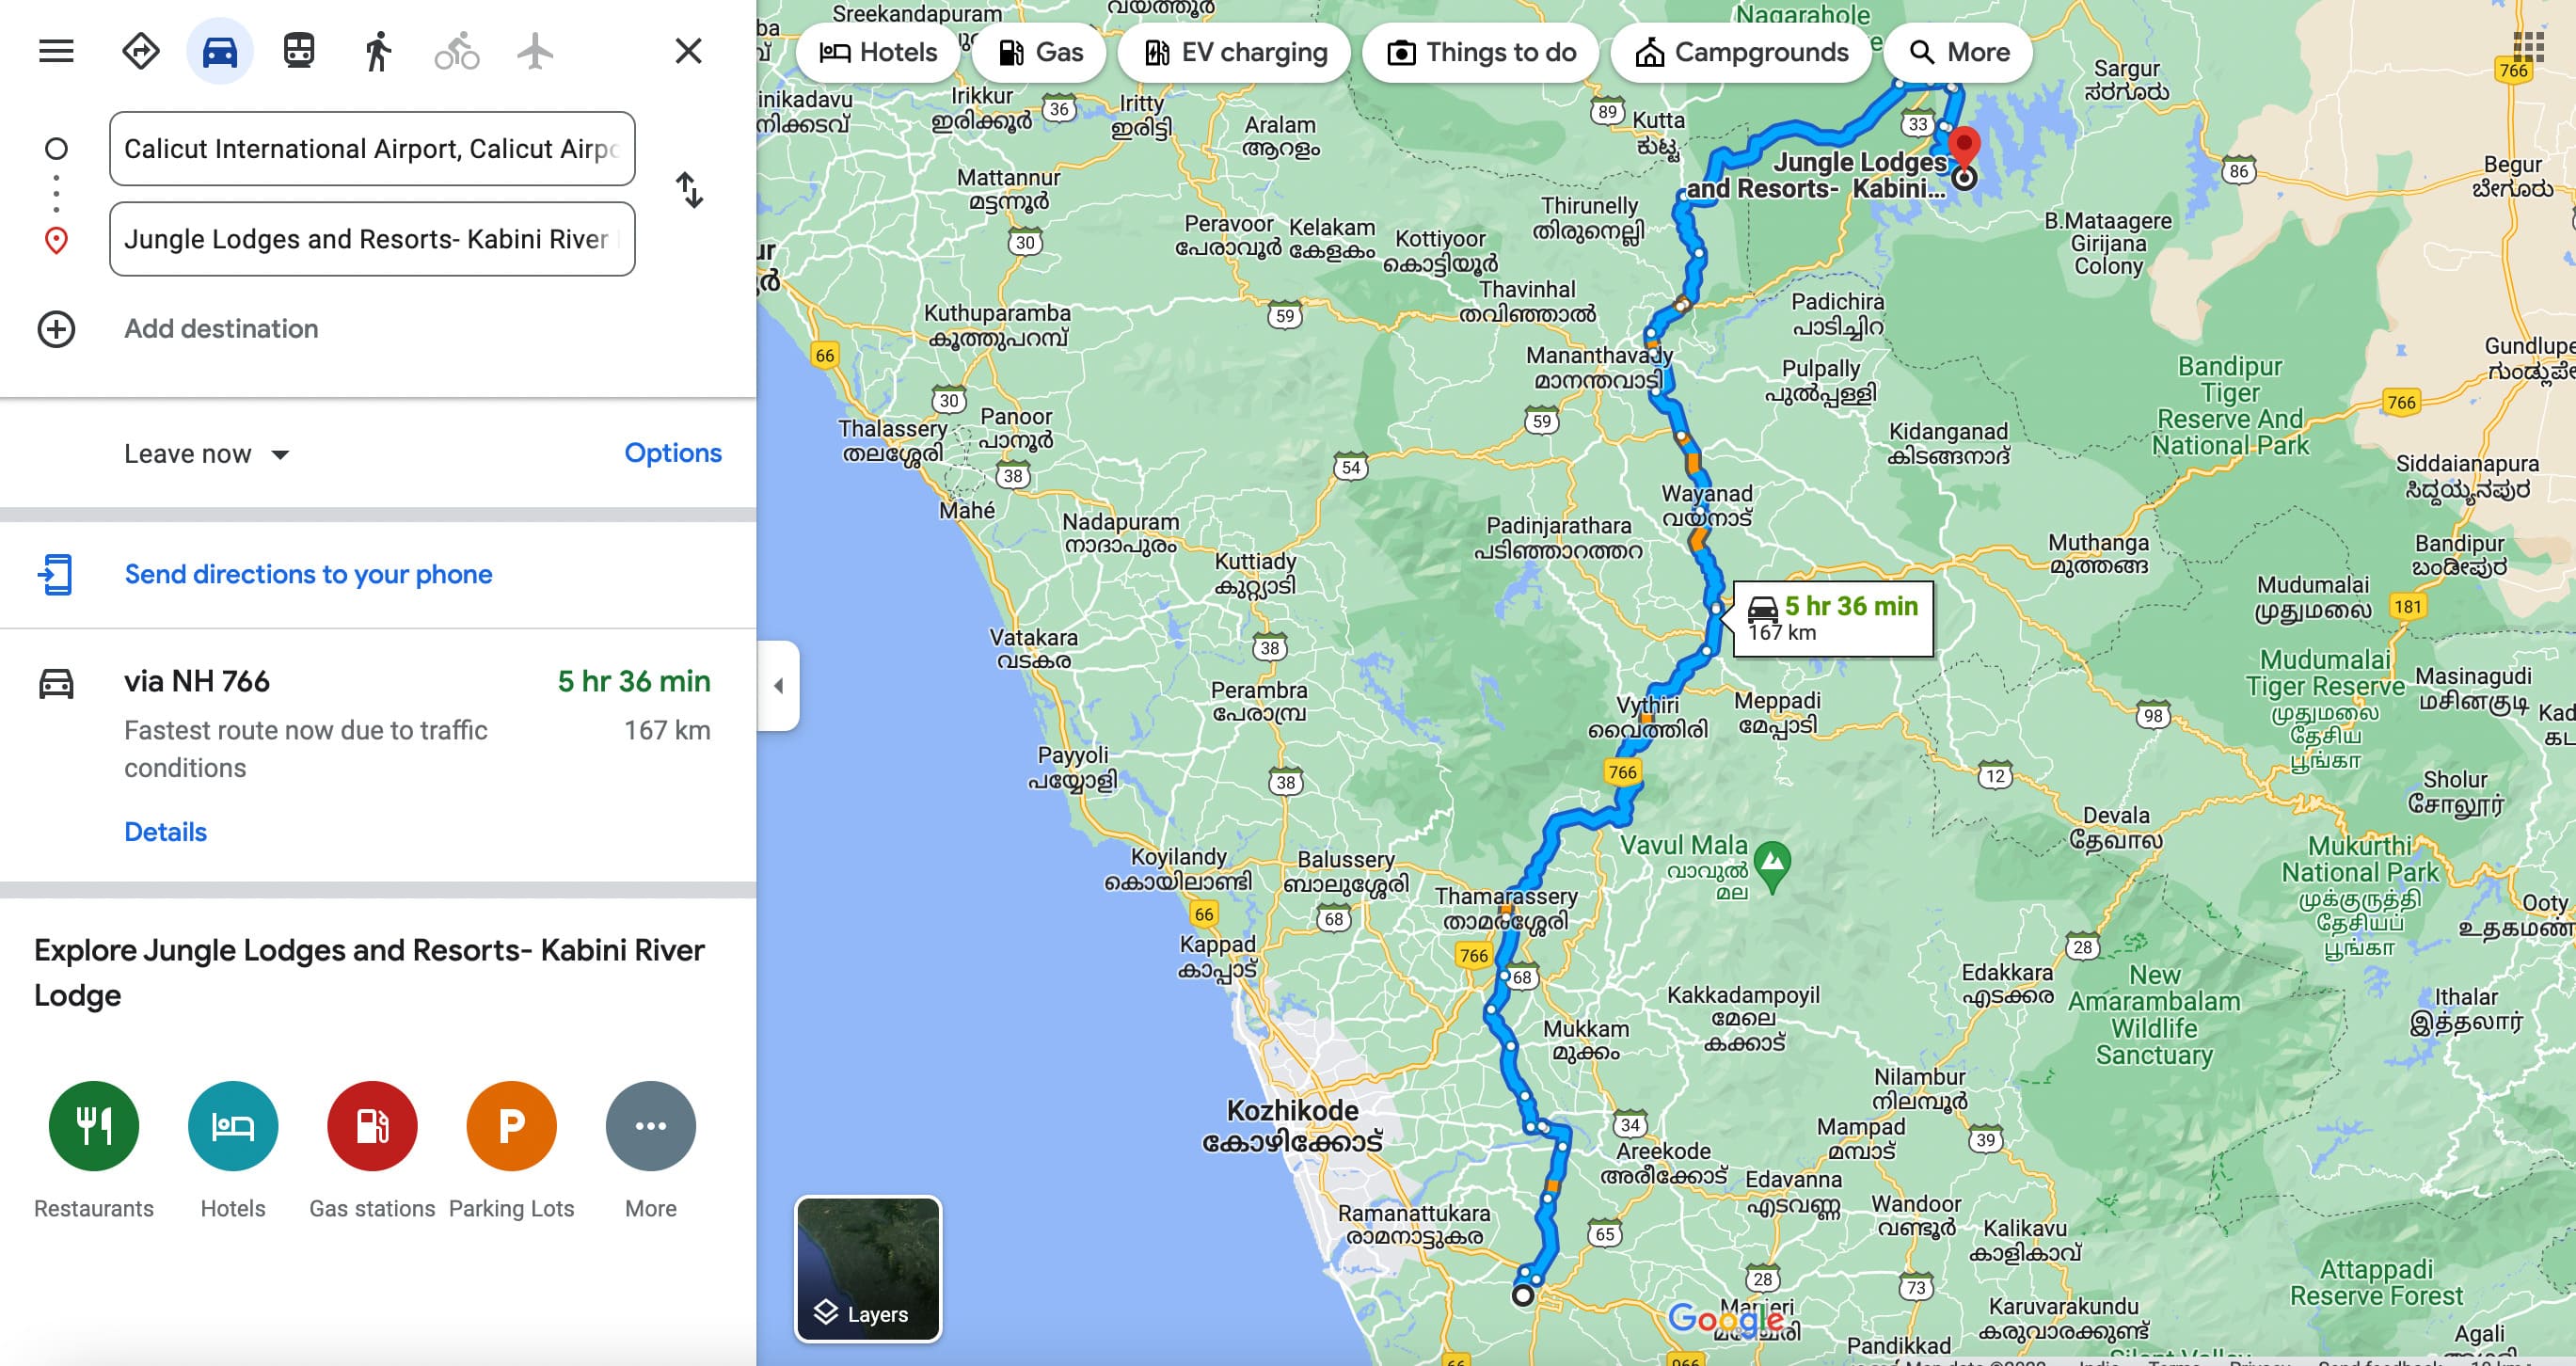 Directions to Kabini River Lodge, Jungle Lodges and Resorts